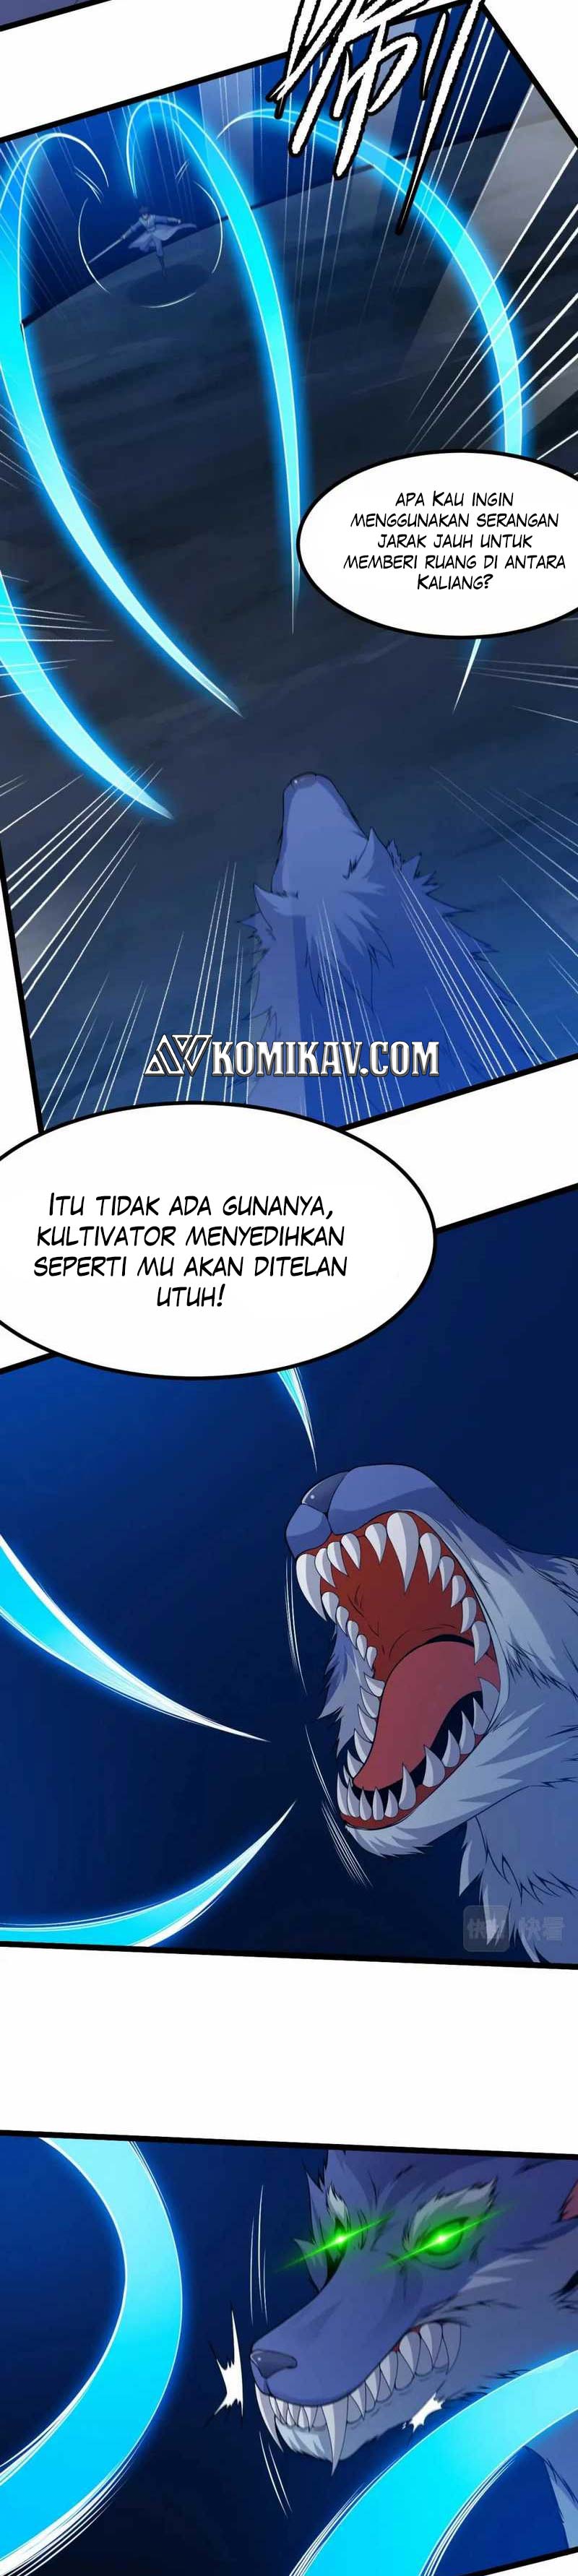 Dilarang COPAS - situs resmi www.mangacanblog.com - Komik i just want to be beaten to death by everyone 117 - chapter 117 118 Indonesia i just want to be beaten to death by everyone 117 - chapter 117 Terbaru 4|Baca Manga Komik Indonesia|Mangacan